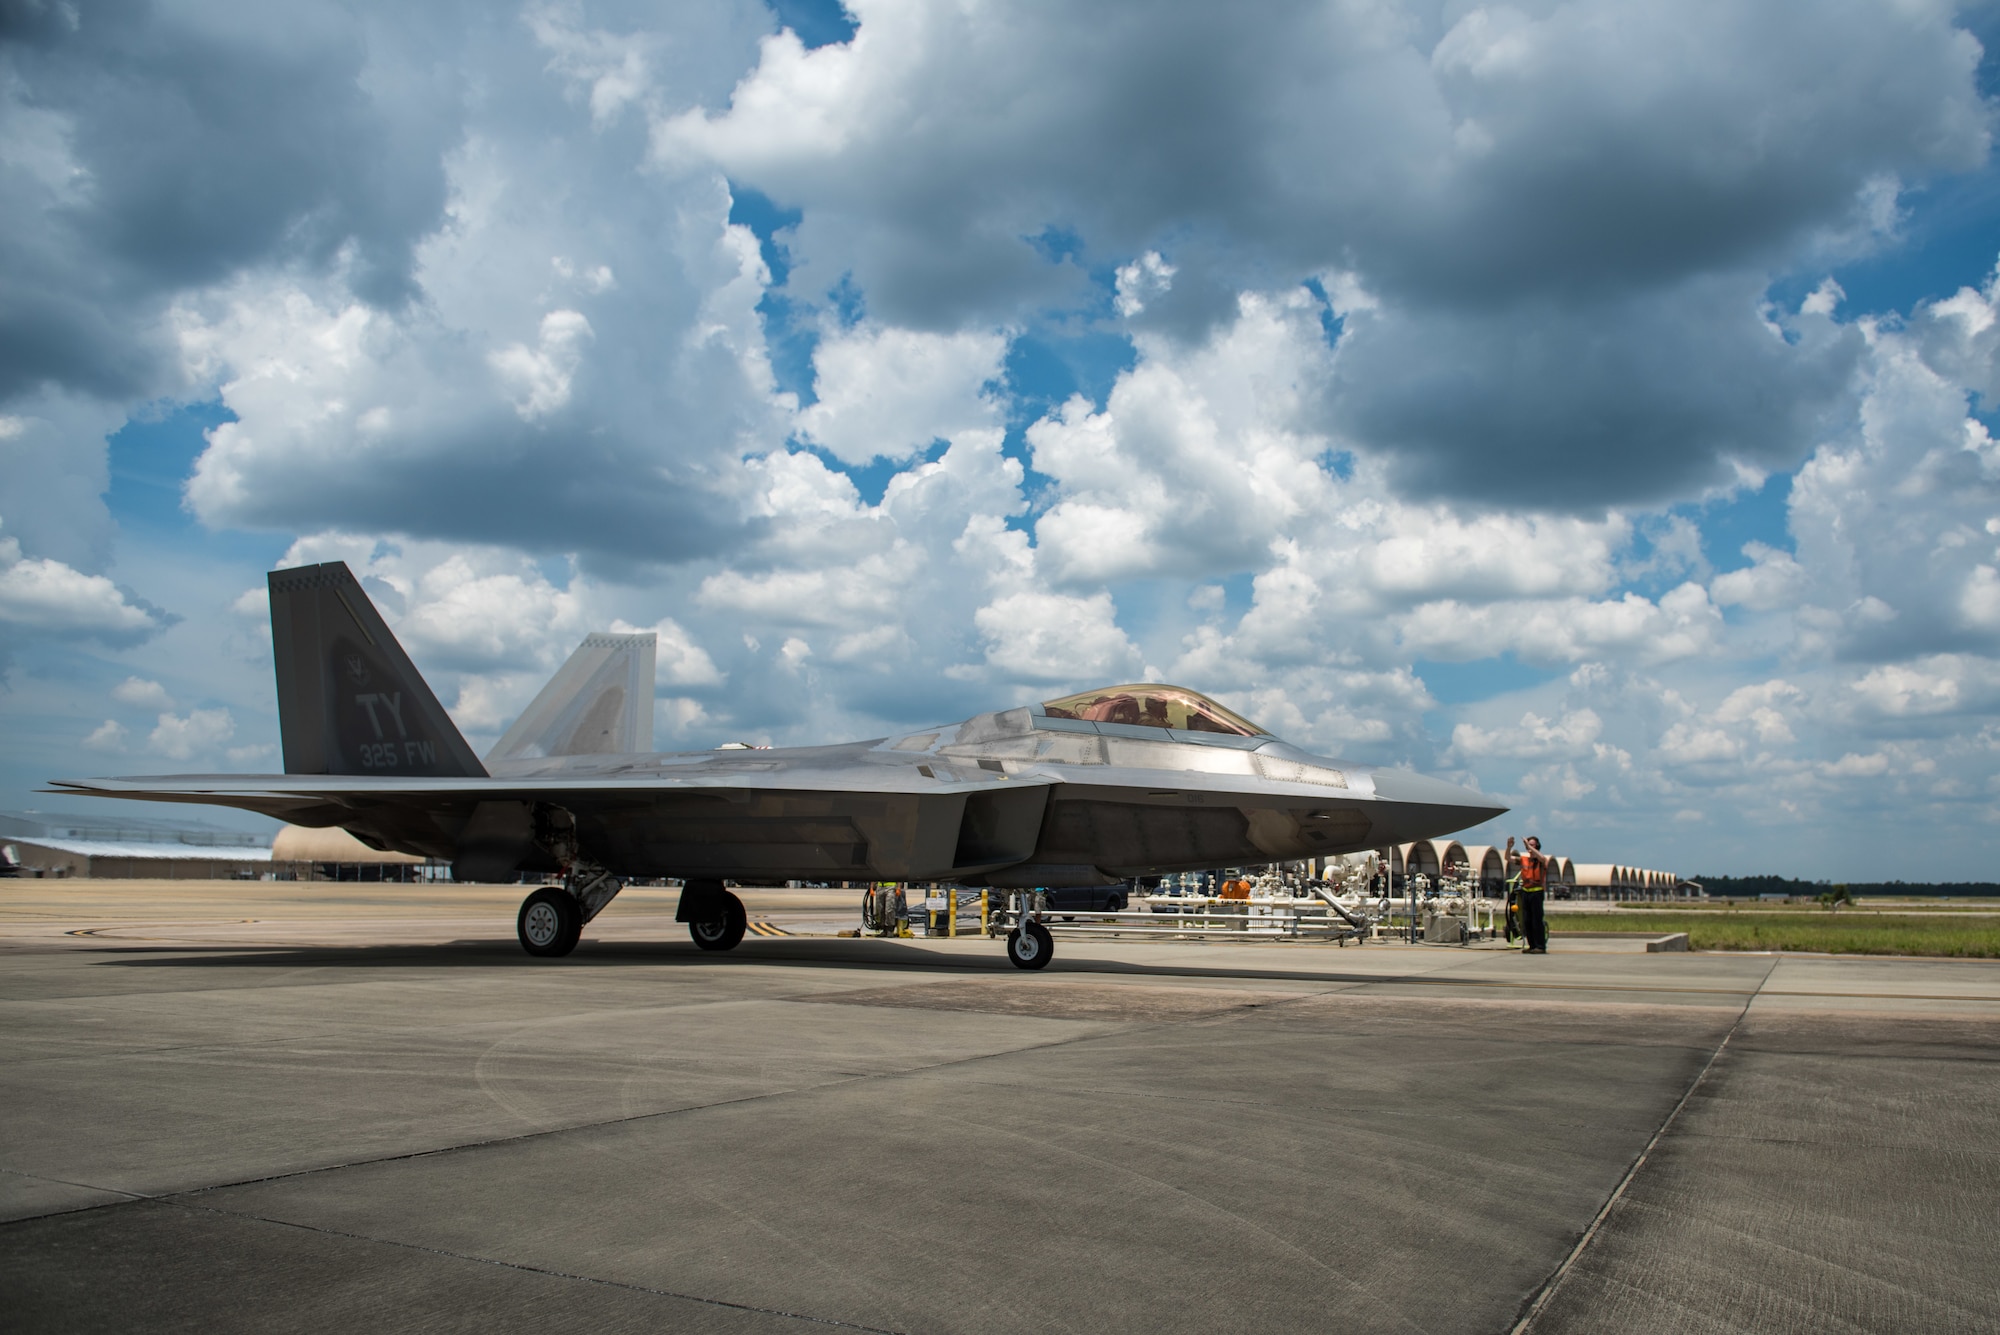 A U.S. Air Force F-22 Raptor from Tyndall Air Force Base refuels via hot pits at Eglin AFB, Florida, July 2, 2019.